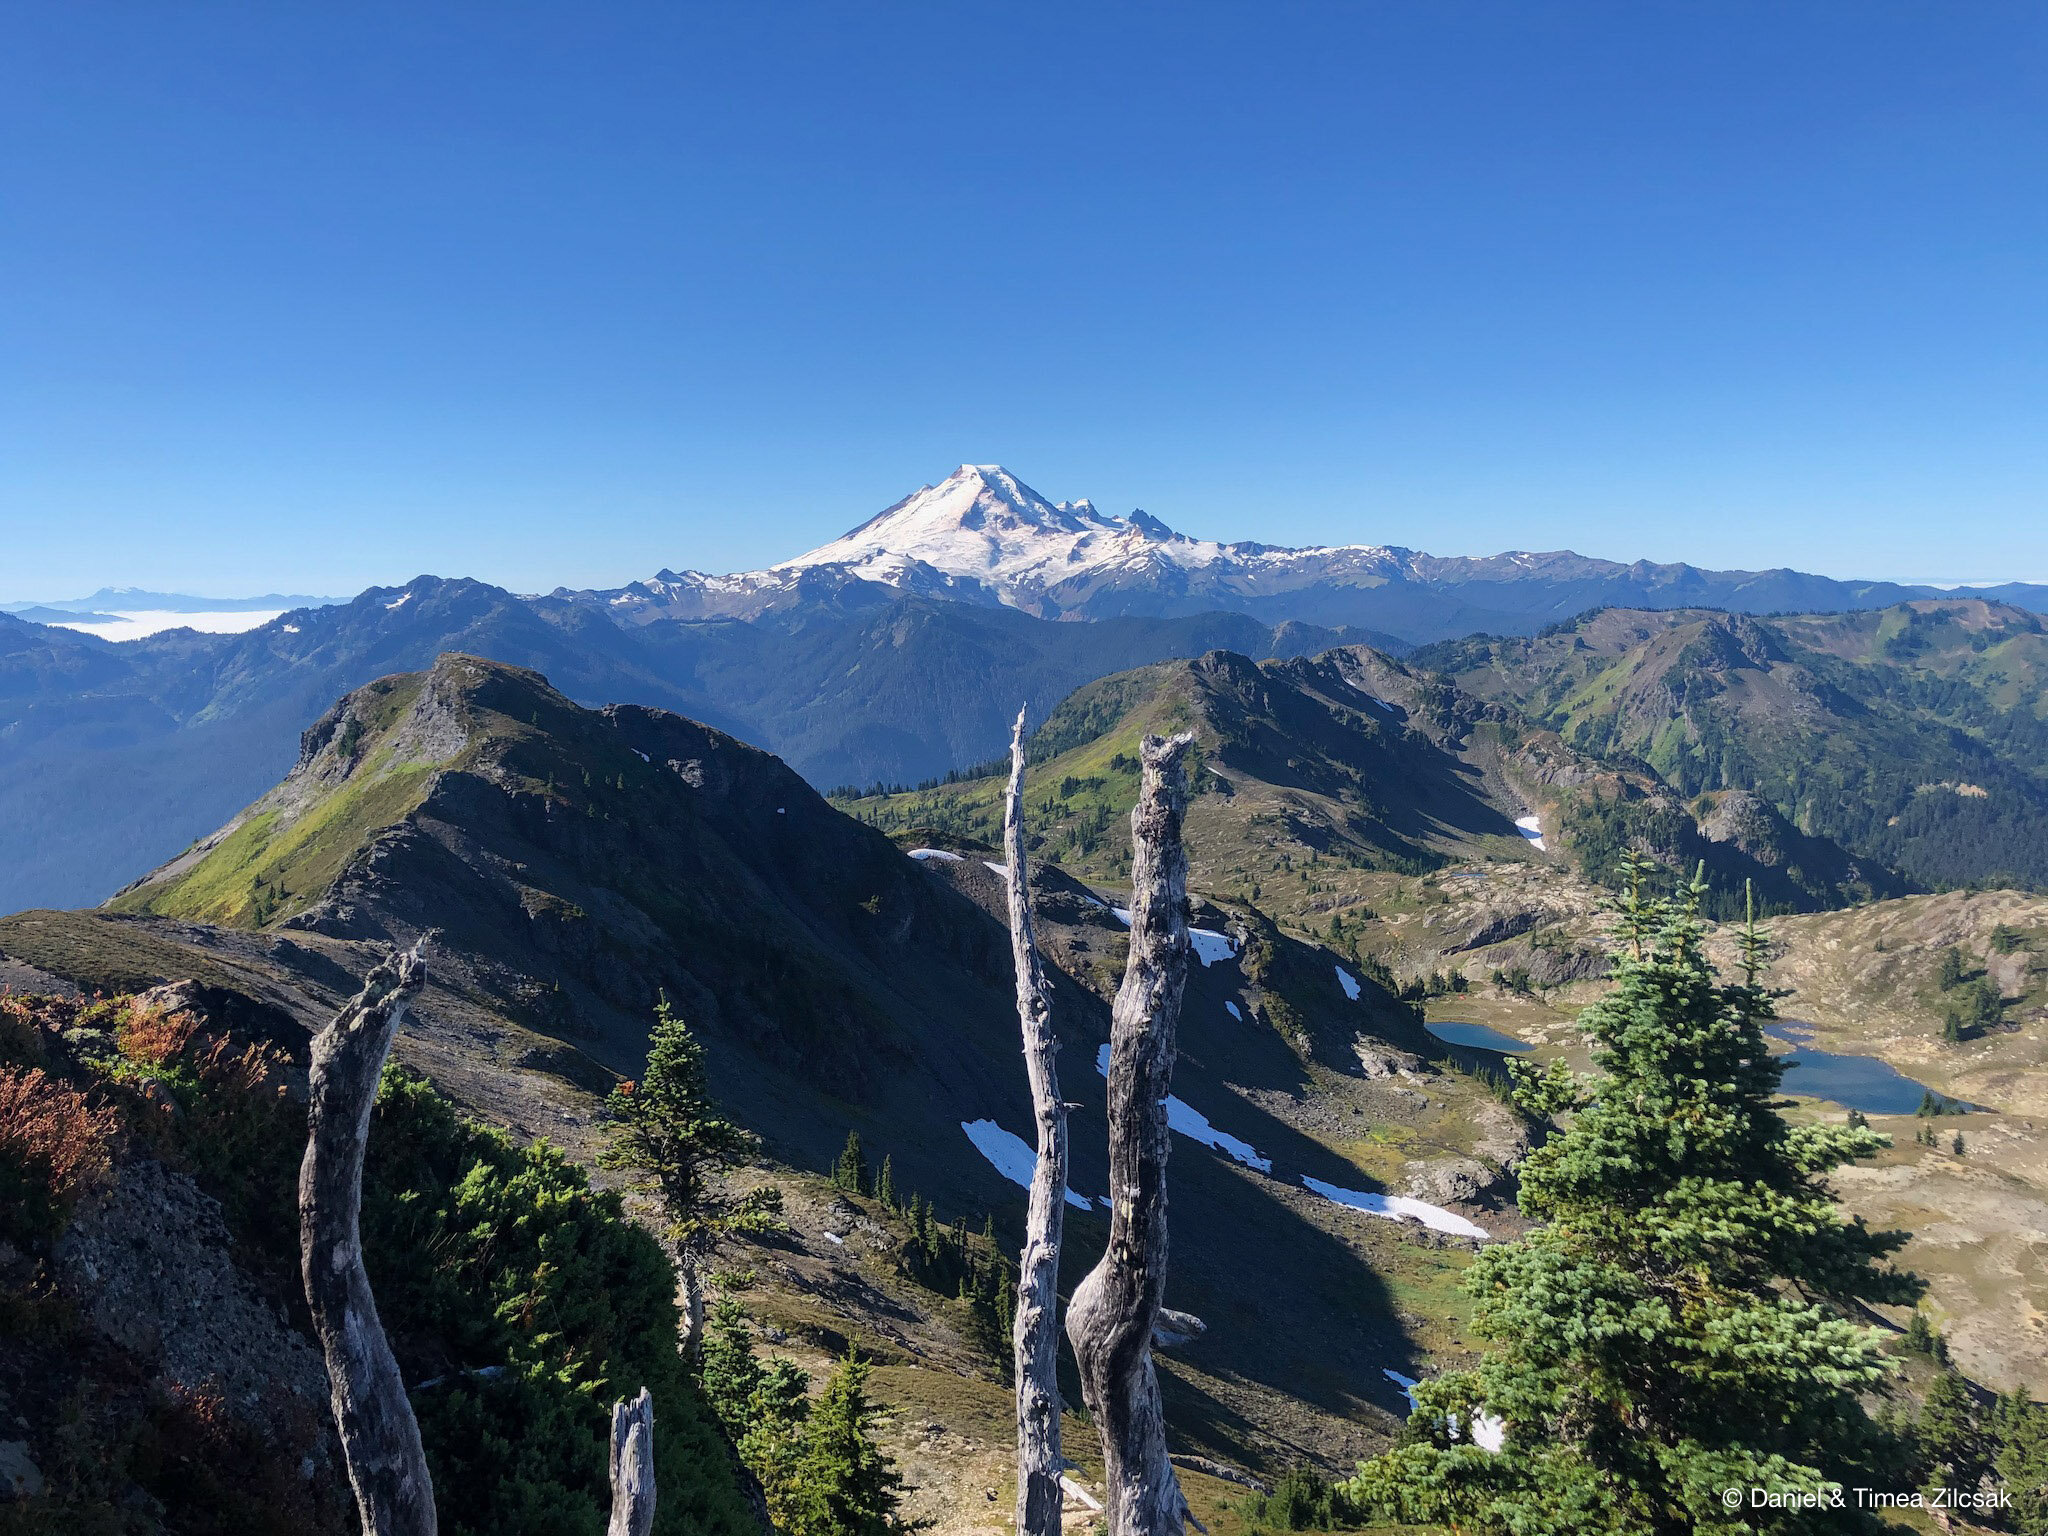 View of Mt Baker from the summit of Yellow Aster Butte